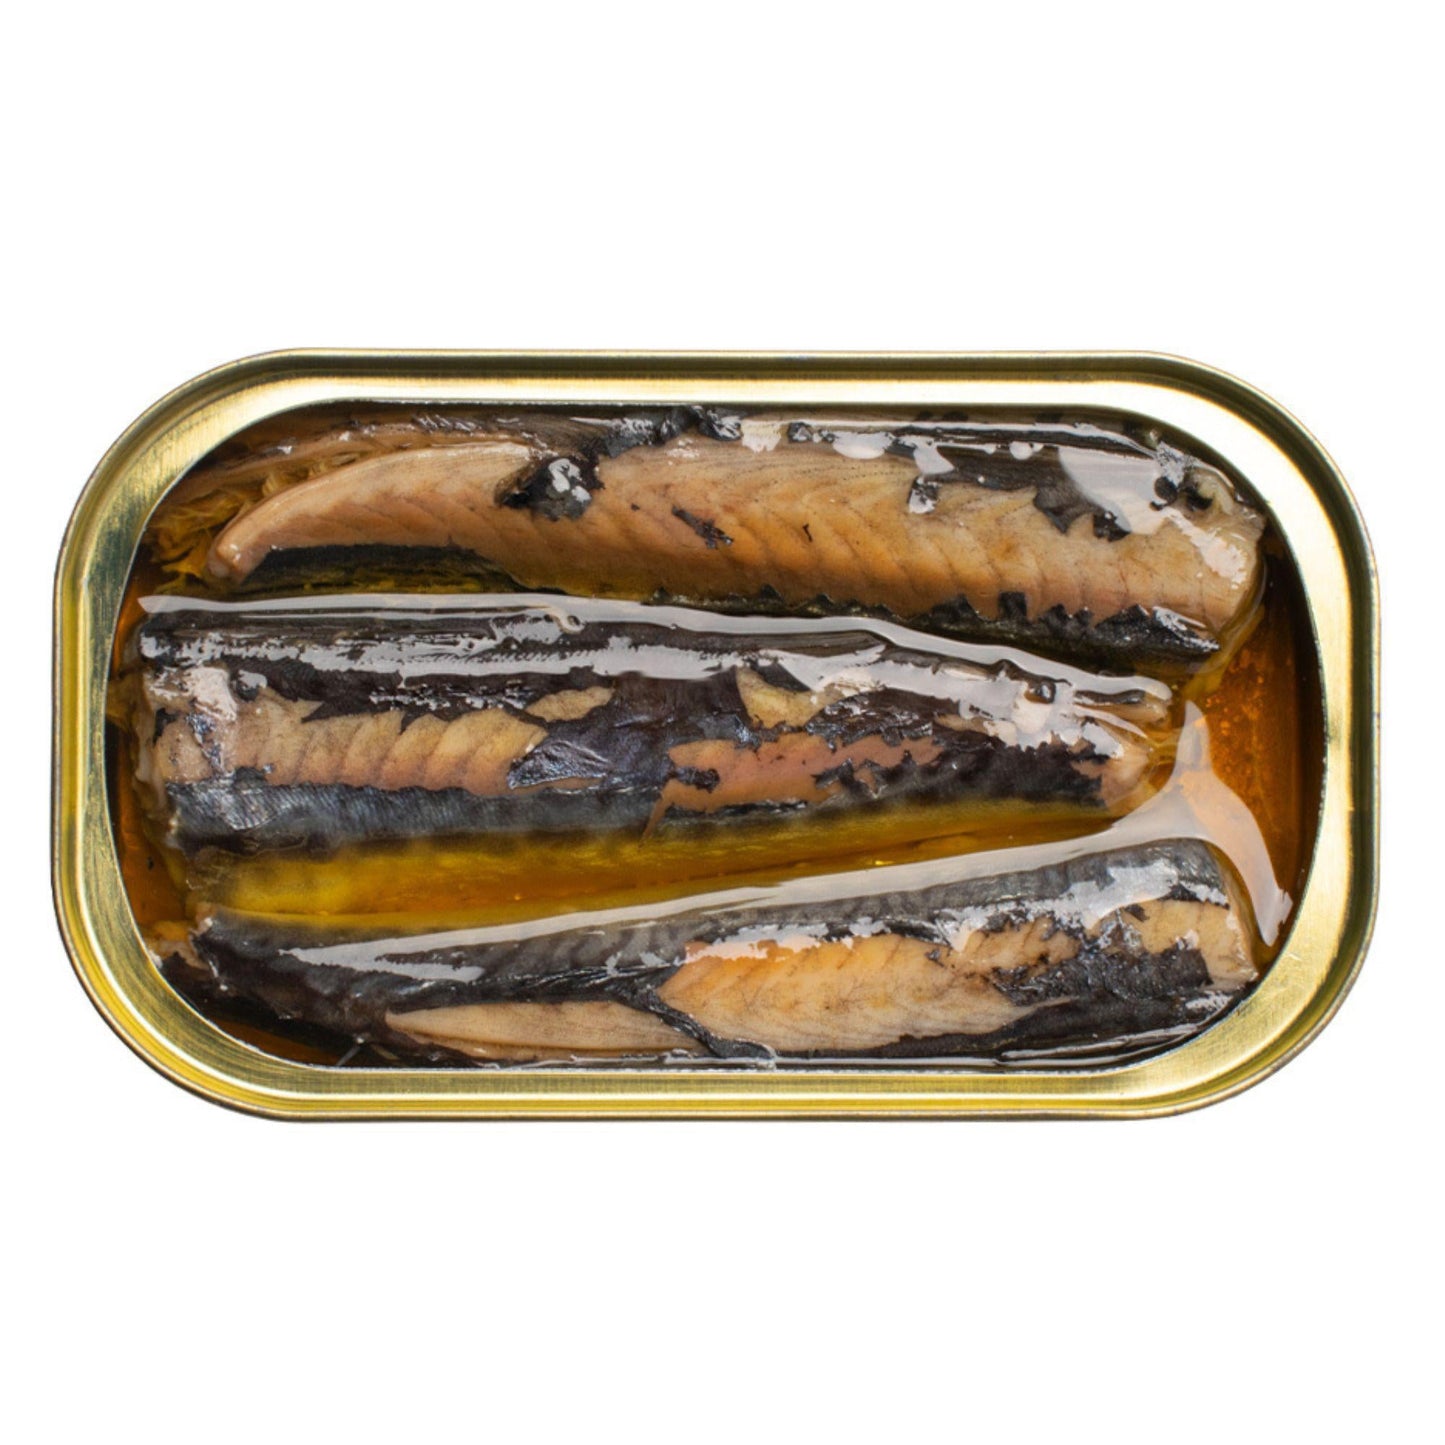 Jose Gourmet - Small Mackerel in Olive Oil (90G) - The Epicurean Trader